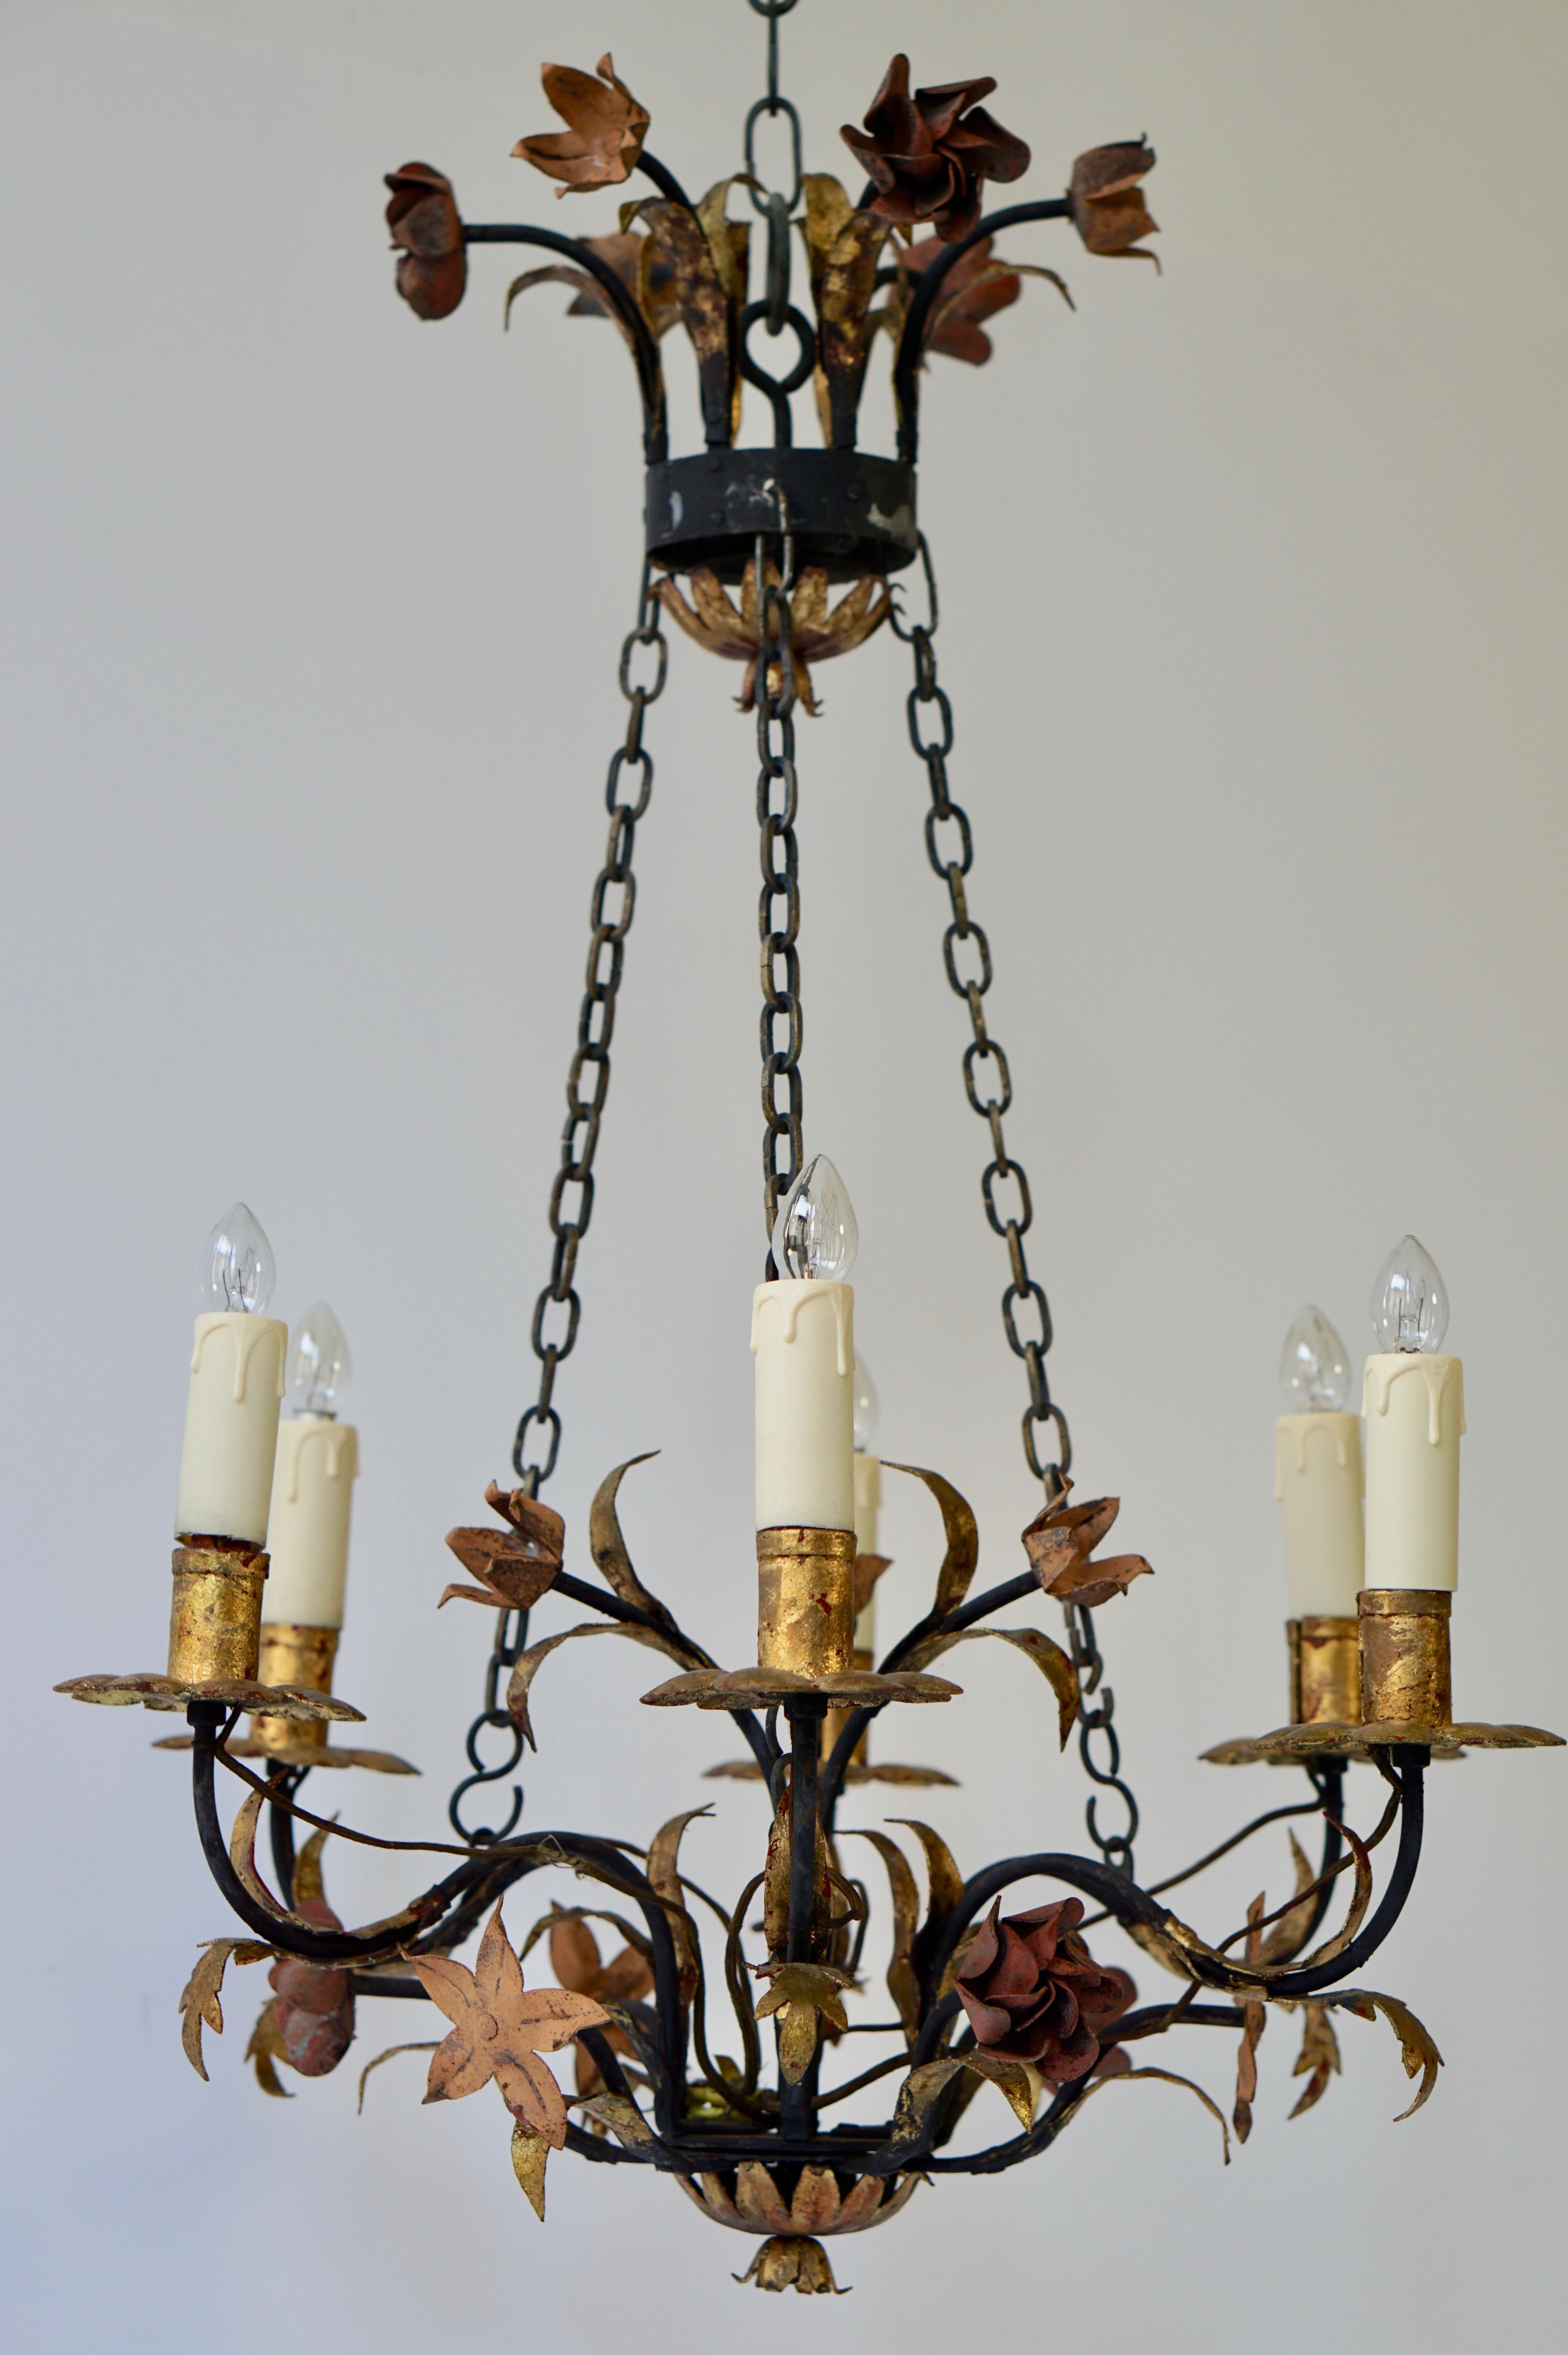 Metal six-light chandelier with flowers and gilded leaves.
Measures: Diameter 48 cm.
Height fixture 70 cm.
Total height with the chain 110 cm.

This chandelier must be rewired.